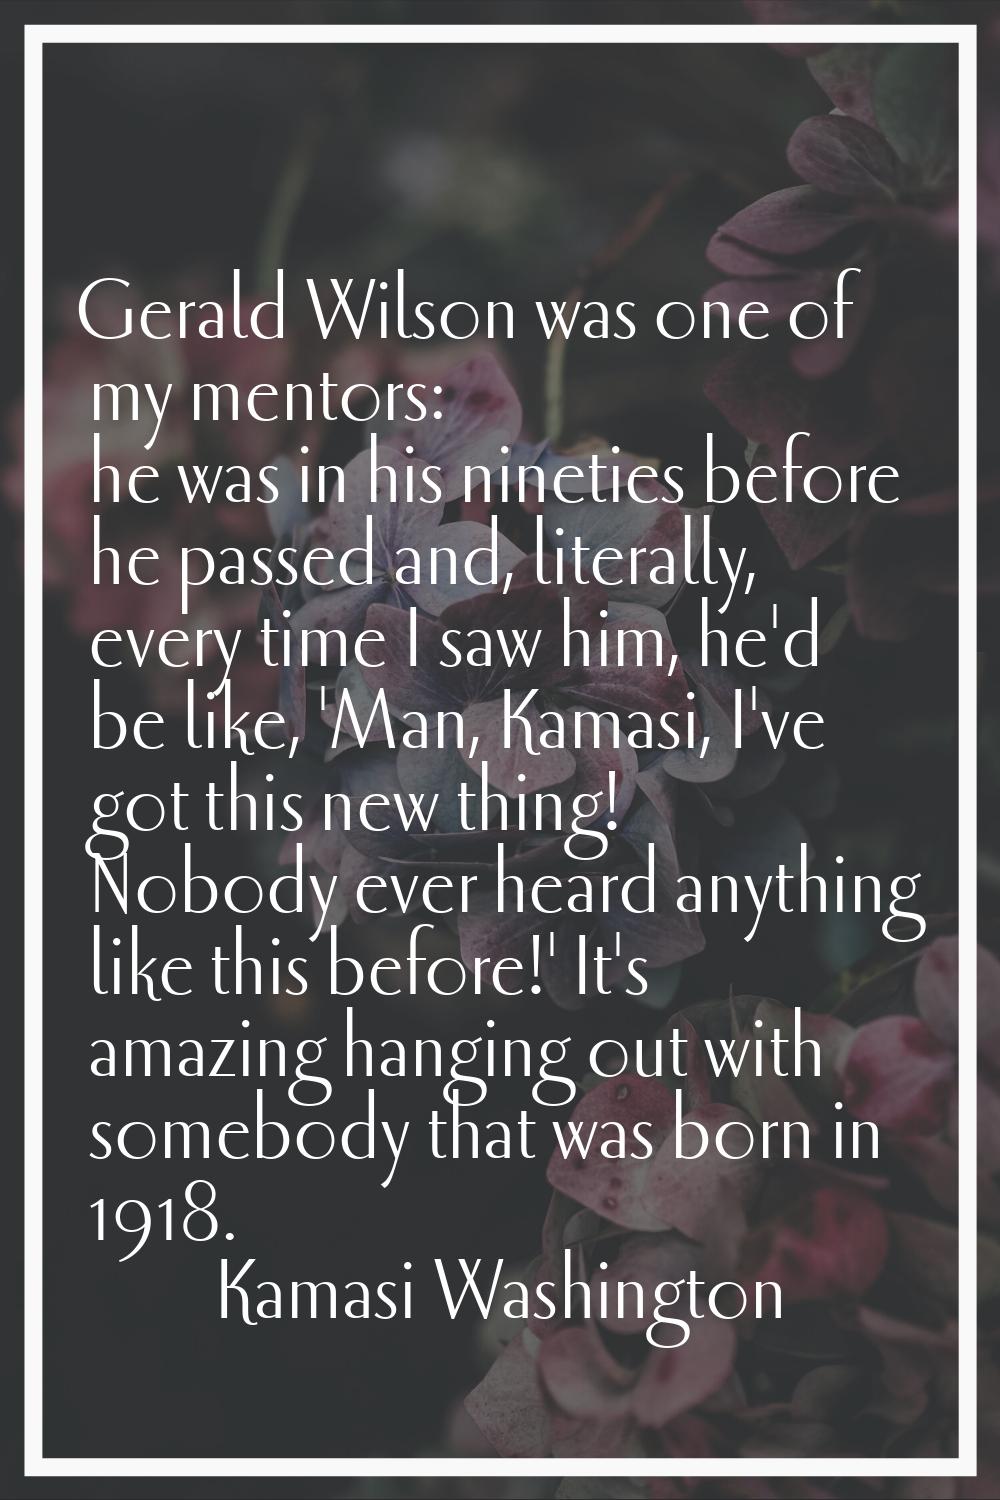 Gerald Wilson was one of my mentors: he was in his nineties before he passed and, literally, every 